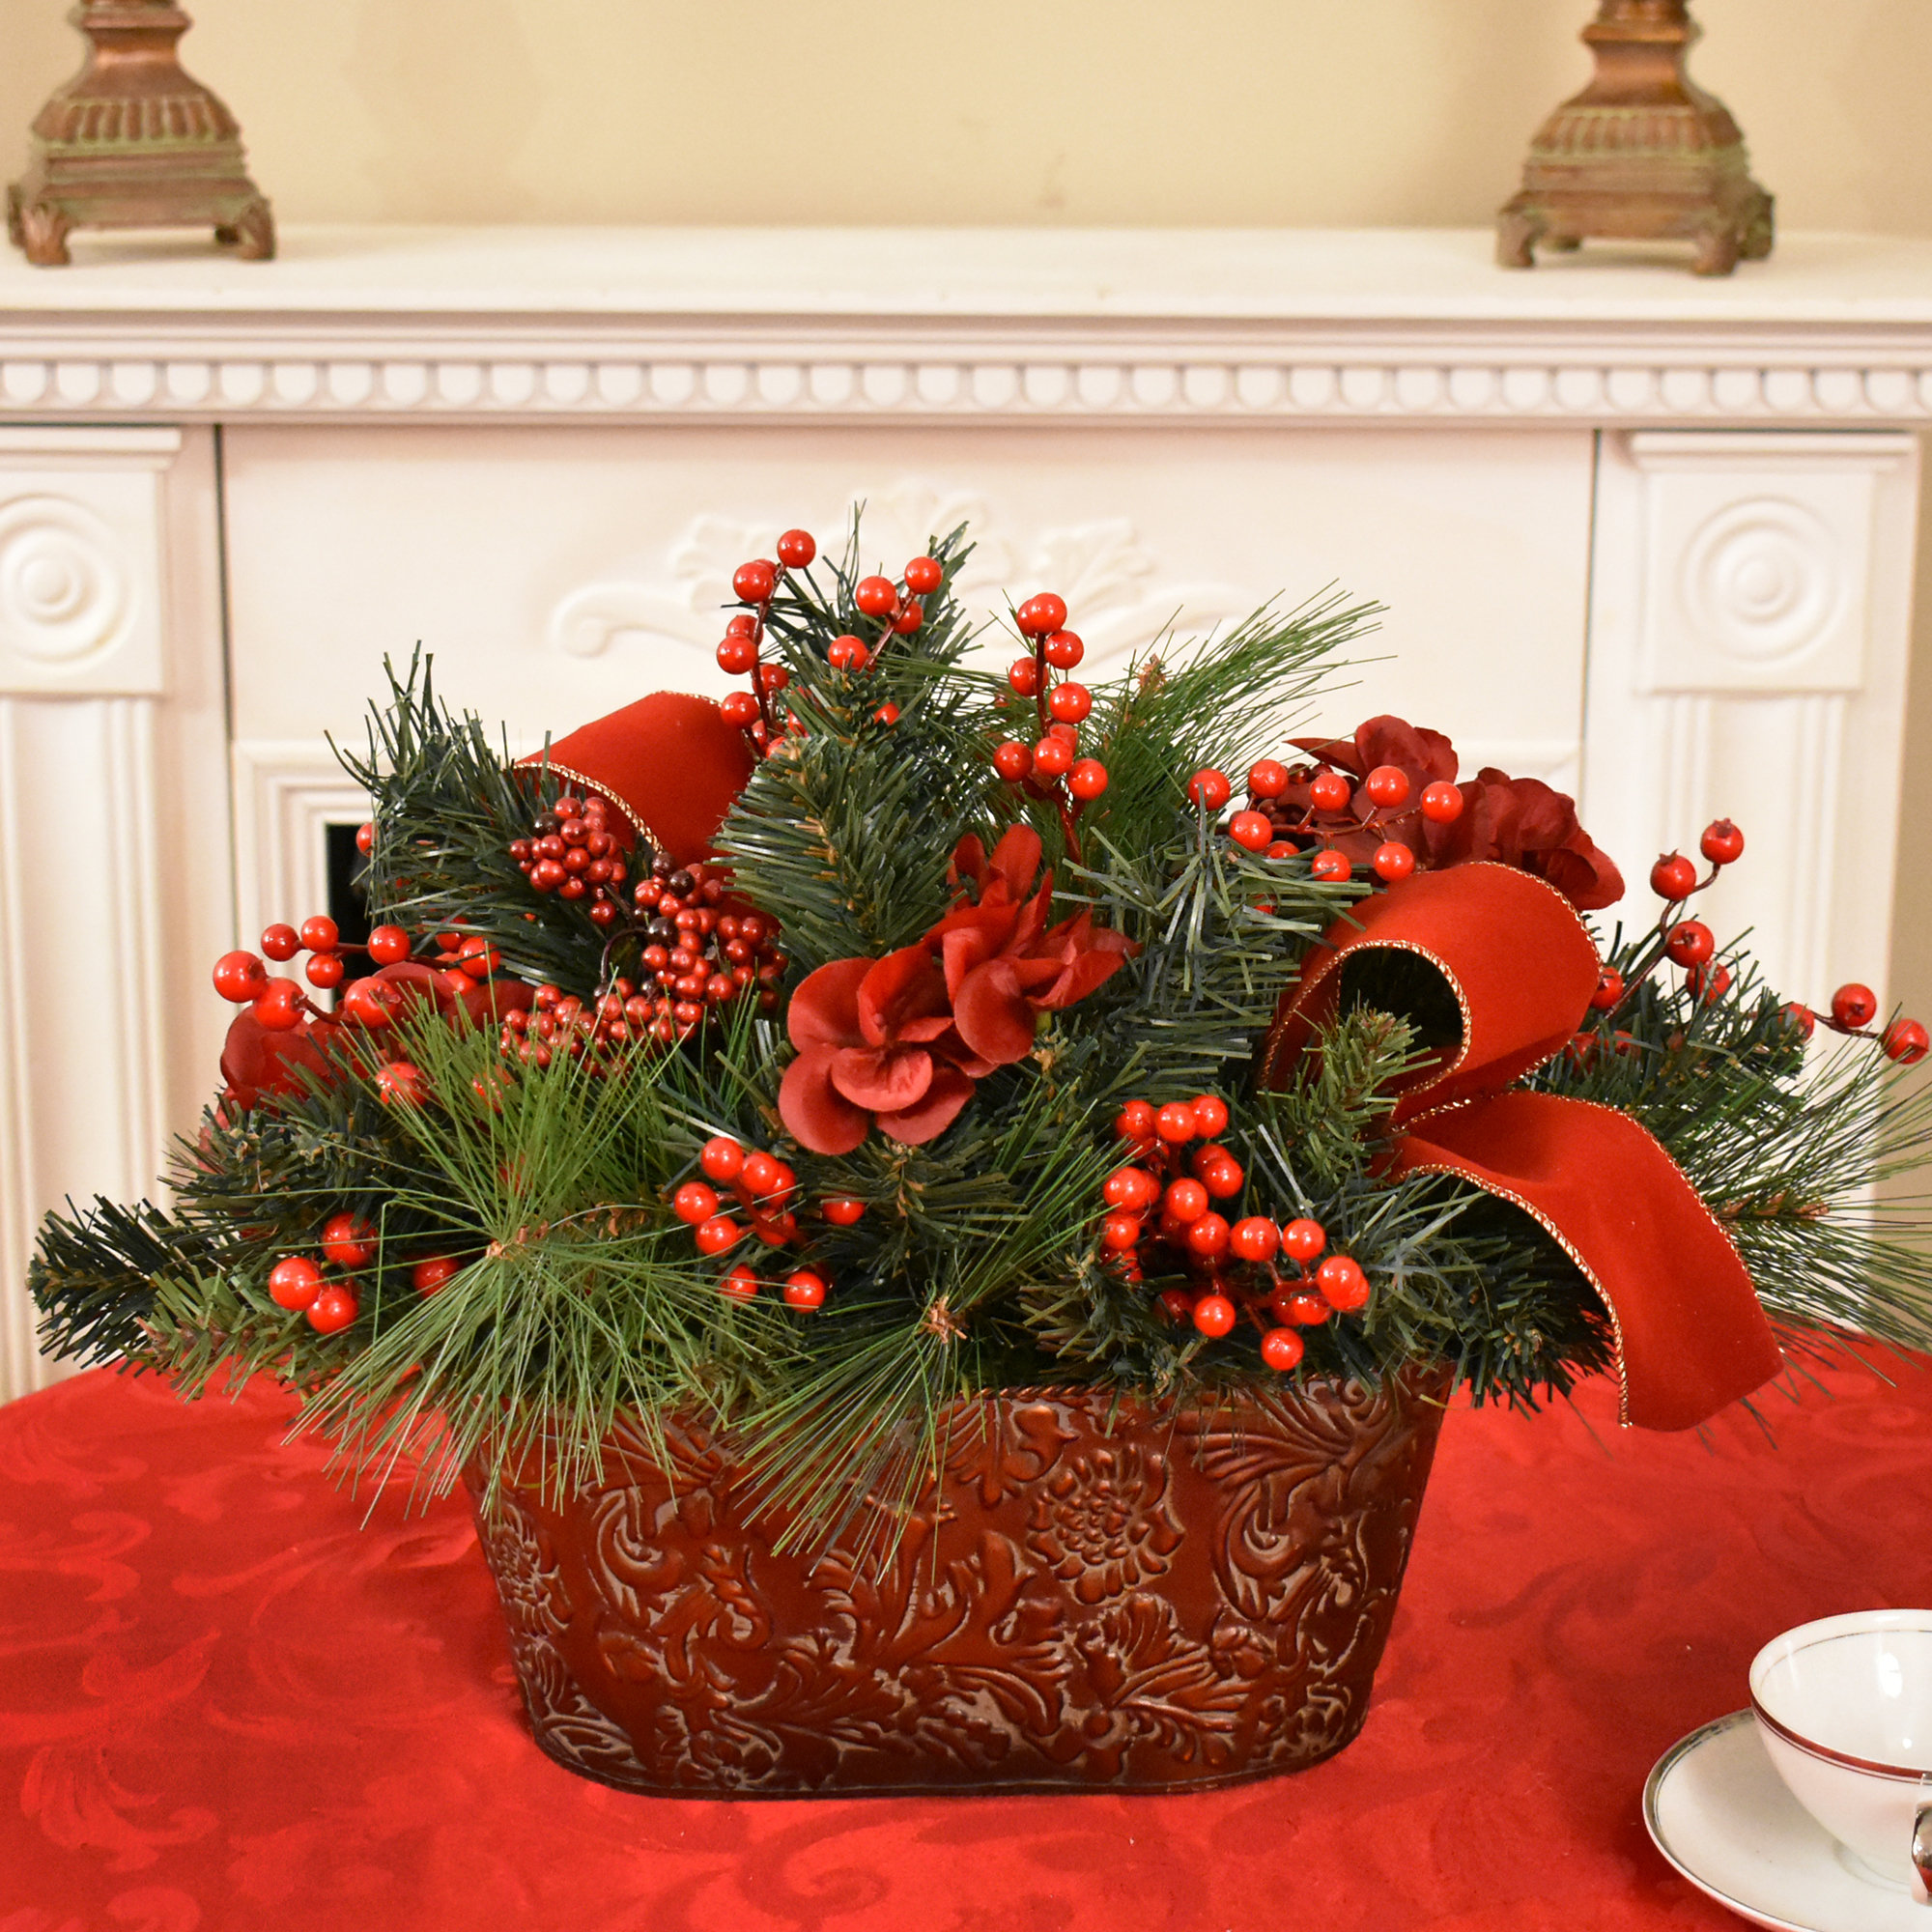 White Floral and Mixed Pine Christmas Centerpiece With Lantern Winter Floral  Centerpiecesilk Christmas Floral Arrangement 